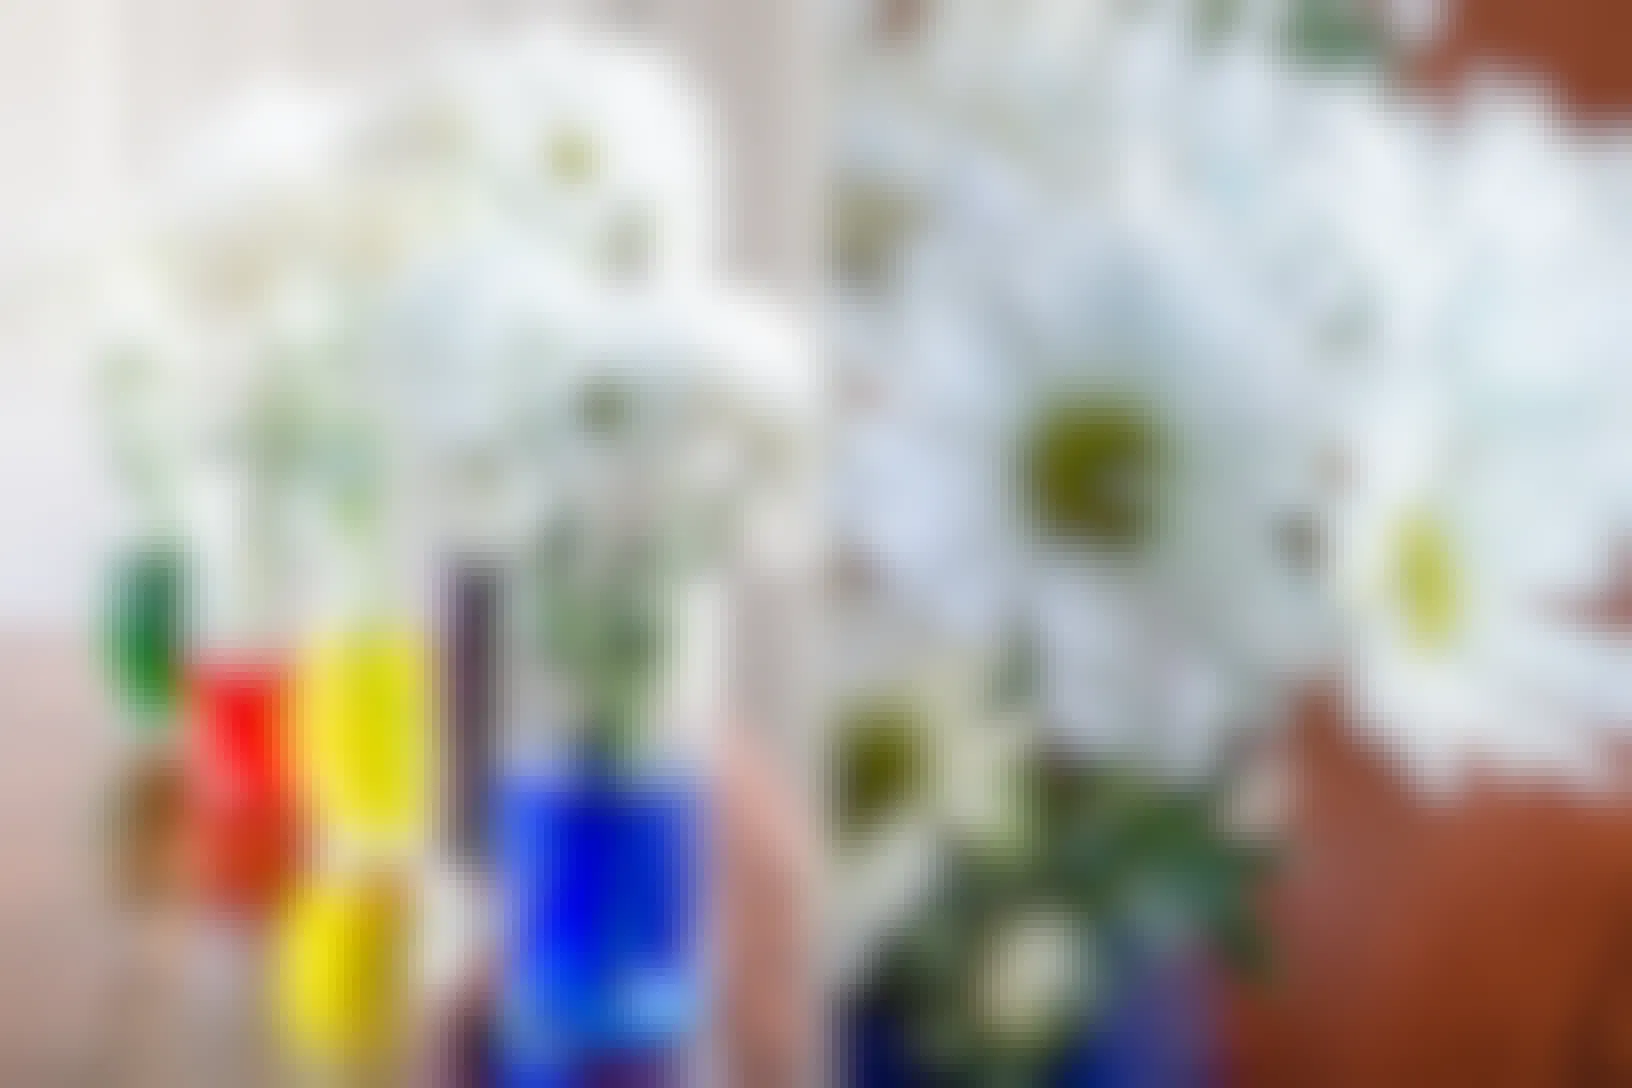 Use white flowers and food coloring for a fun centerpiece and springtime science experiment.